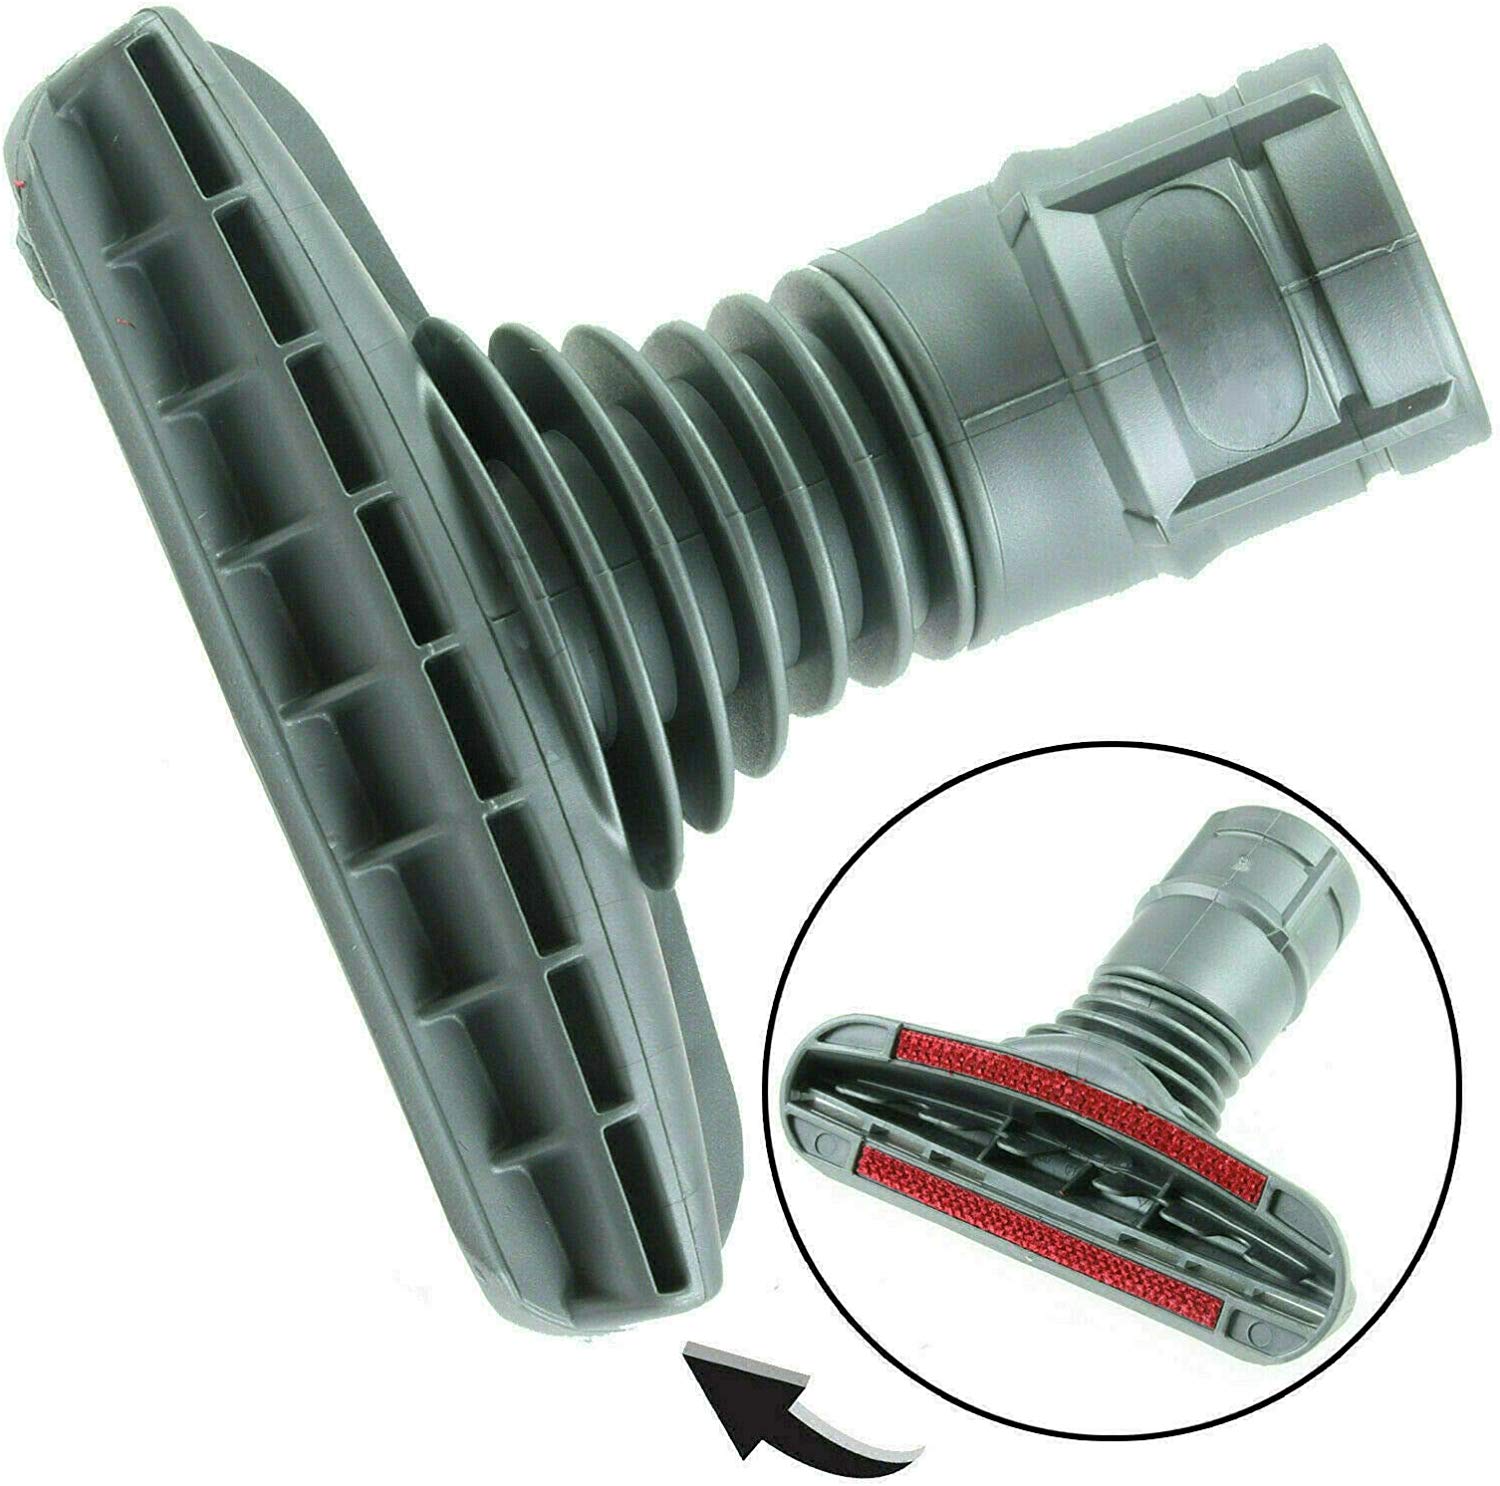 SPARES2GO Swivel Nozzle Stair Tool for Dyson DC01 DC02 DC03 DC04 DC05 DC07 DC14 Vacuum Cleaner